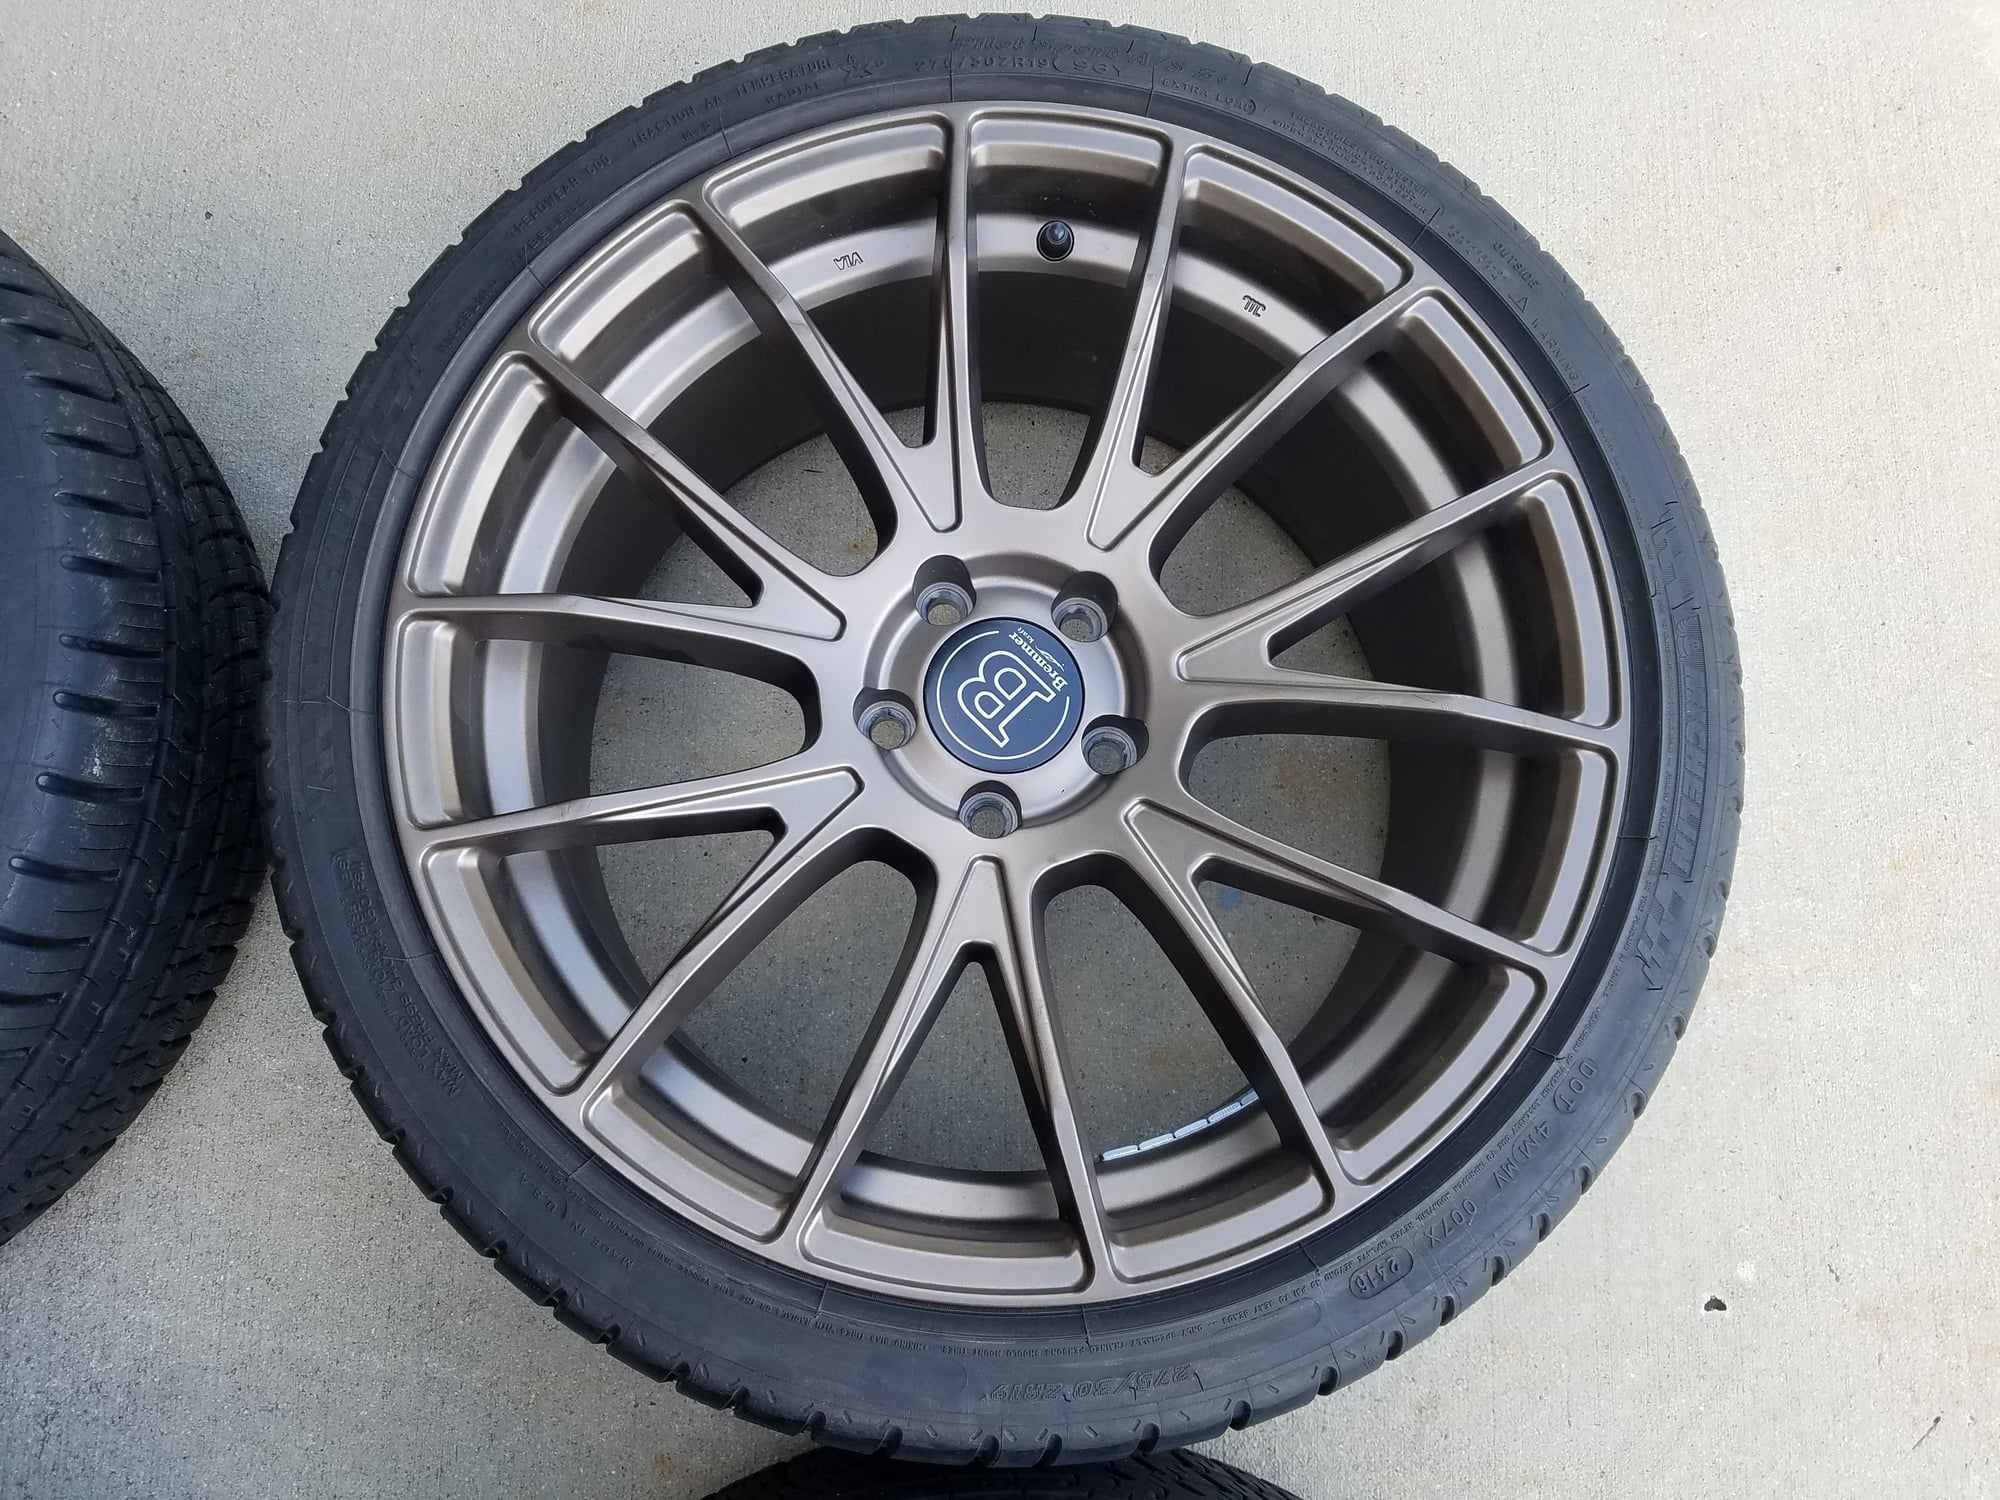 Wheels and Tires/Axles - Practically new Bremmer Kraft BR14's in bronze with Michelin Pilot Sport A/S 3+ - Used - Houston, TX 77074, United States